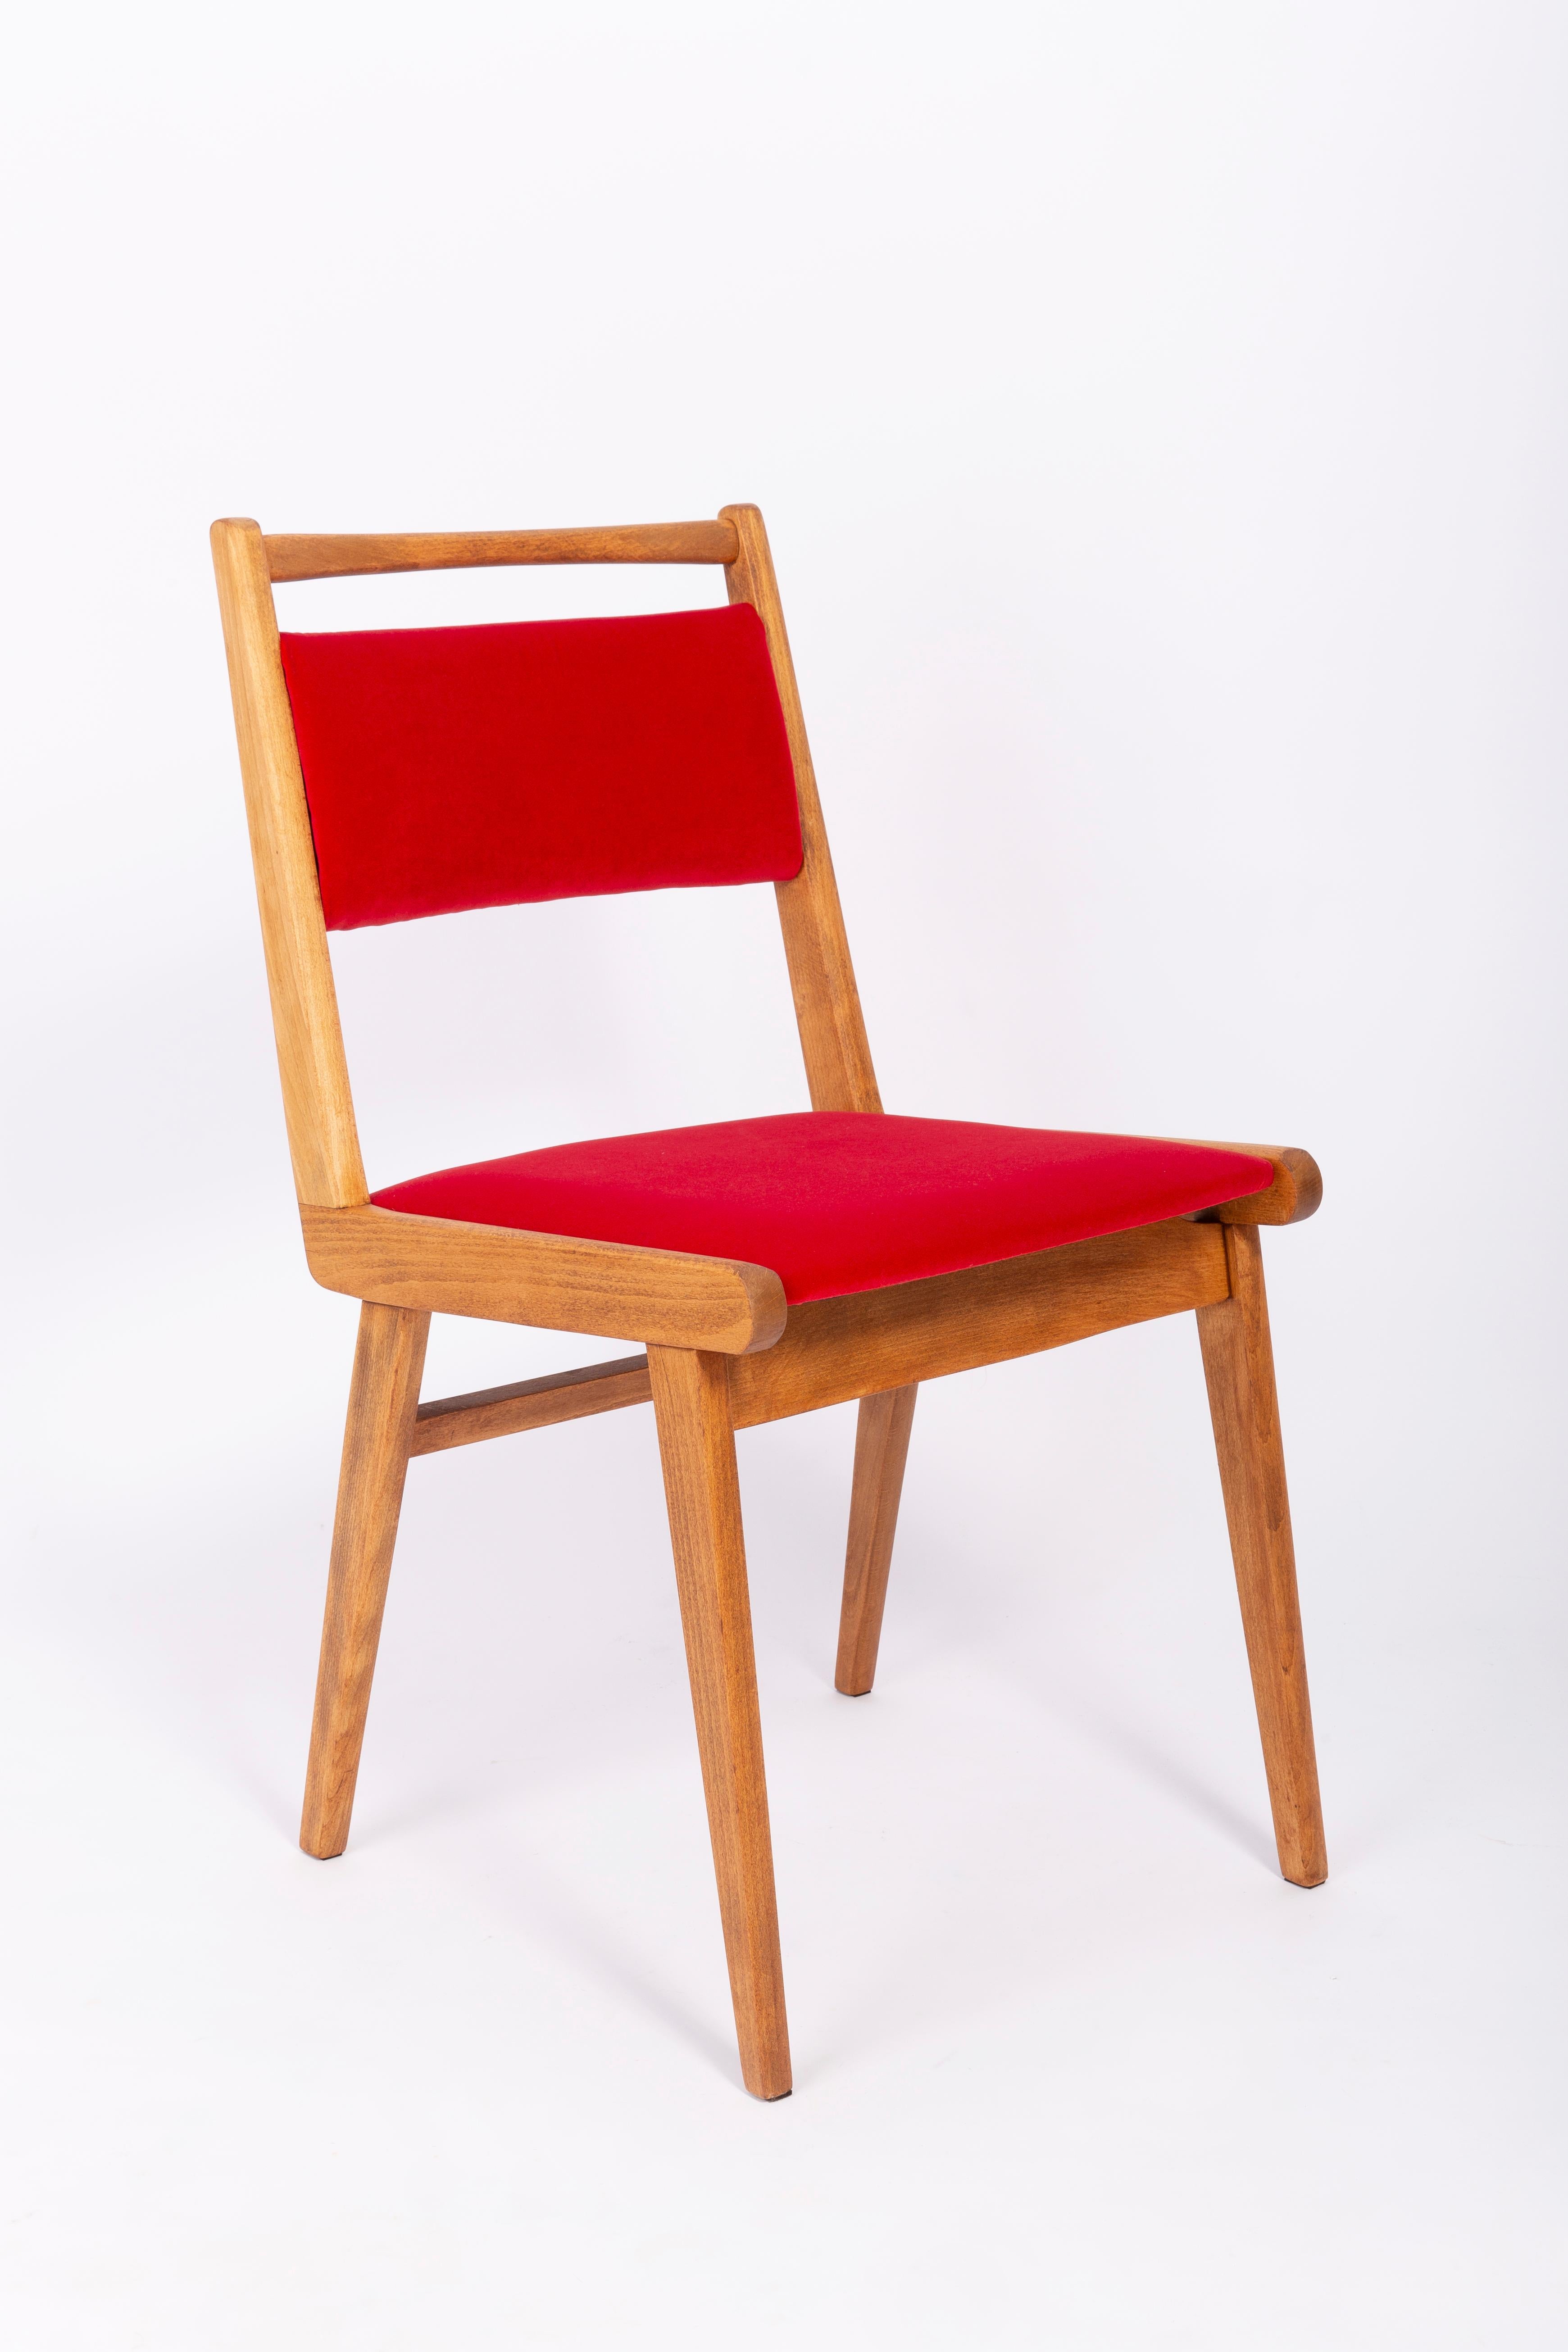 Chairs designed by Prof. Rajmund Halas. It is Jar type model. Made of beechwood. Chairs are after a complete upholstery renovation, the woodwork has been refreshed. Seat and back is dressed in a red, durable and pleasant to the touch velvet fabric.